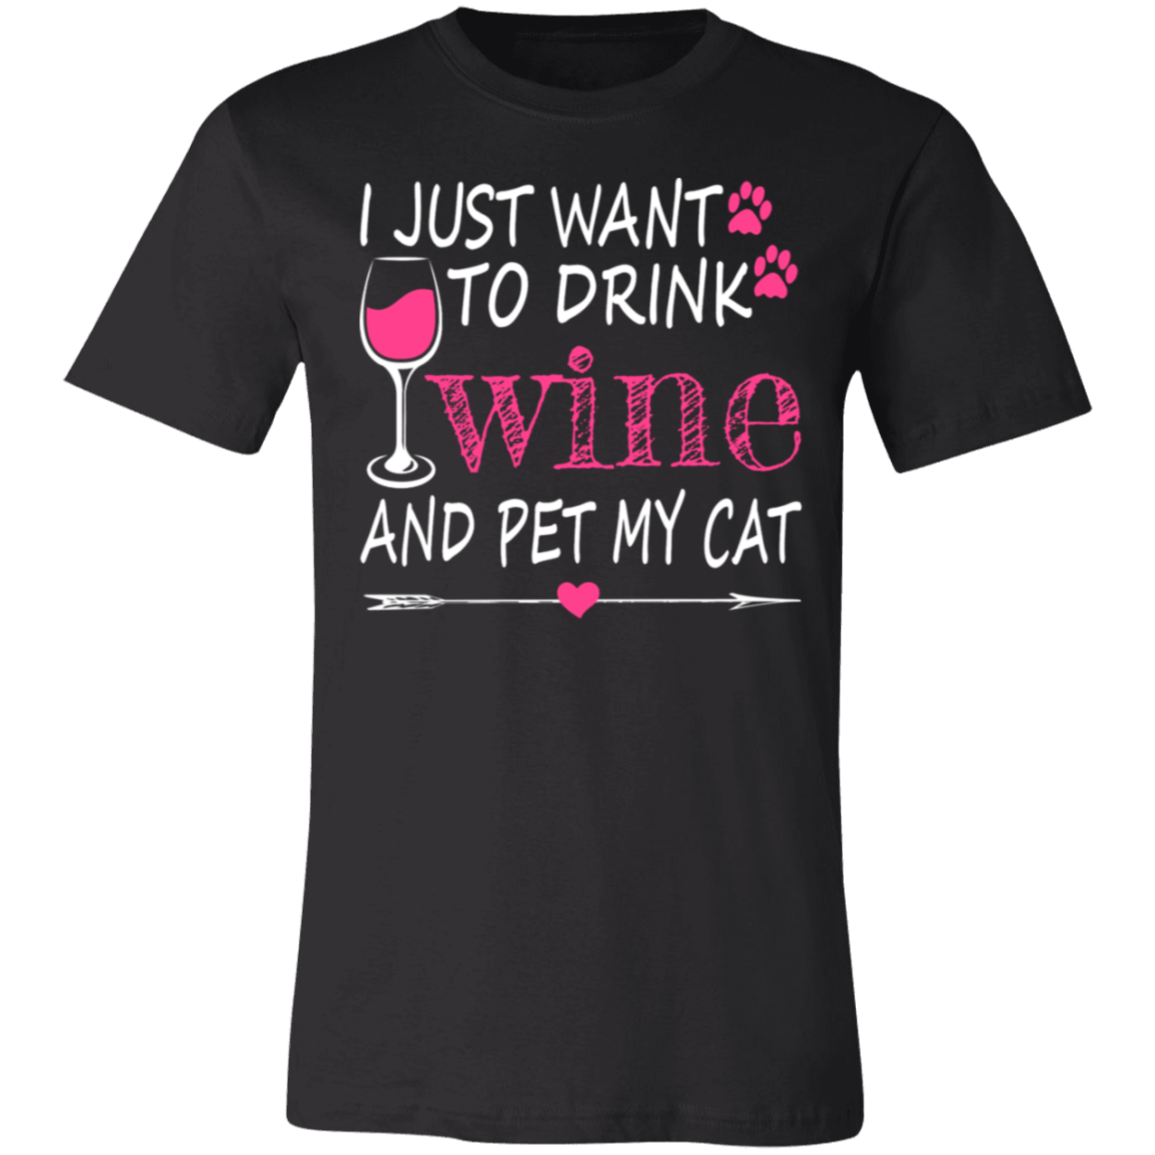 I Just Want to Drink Wine... Jersey Short-Sleeve T-Shirt